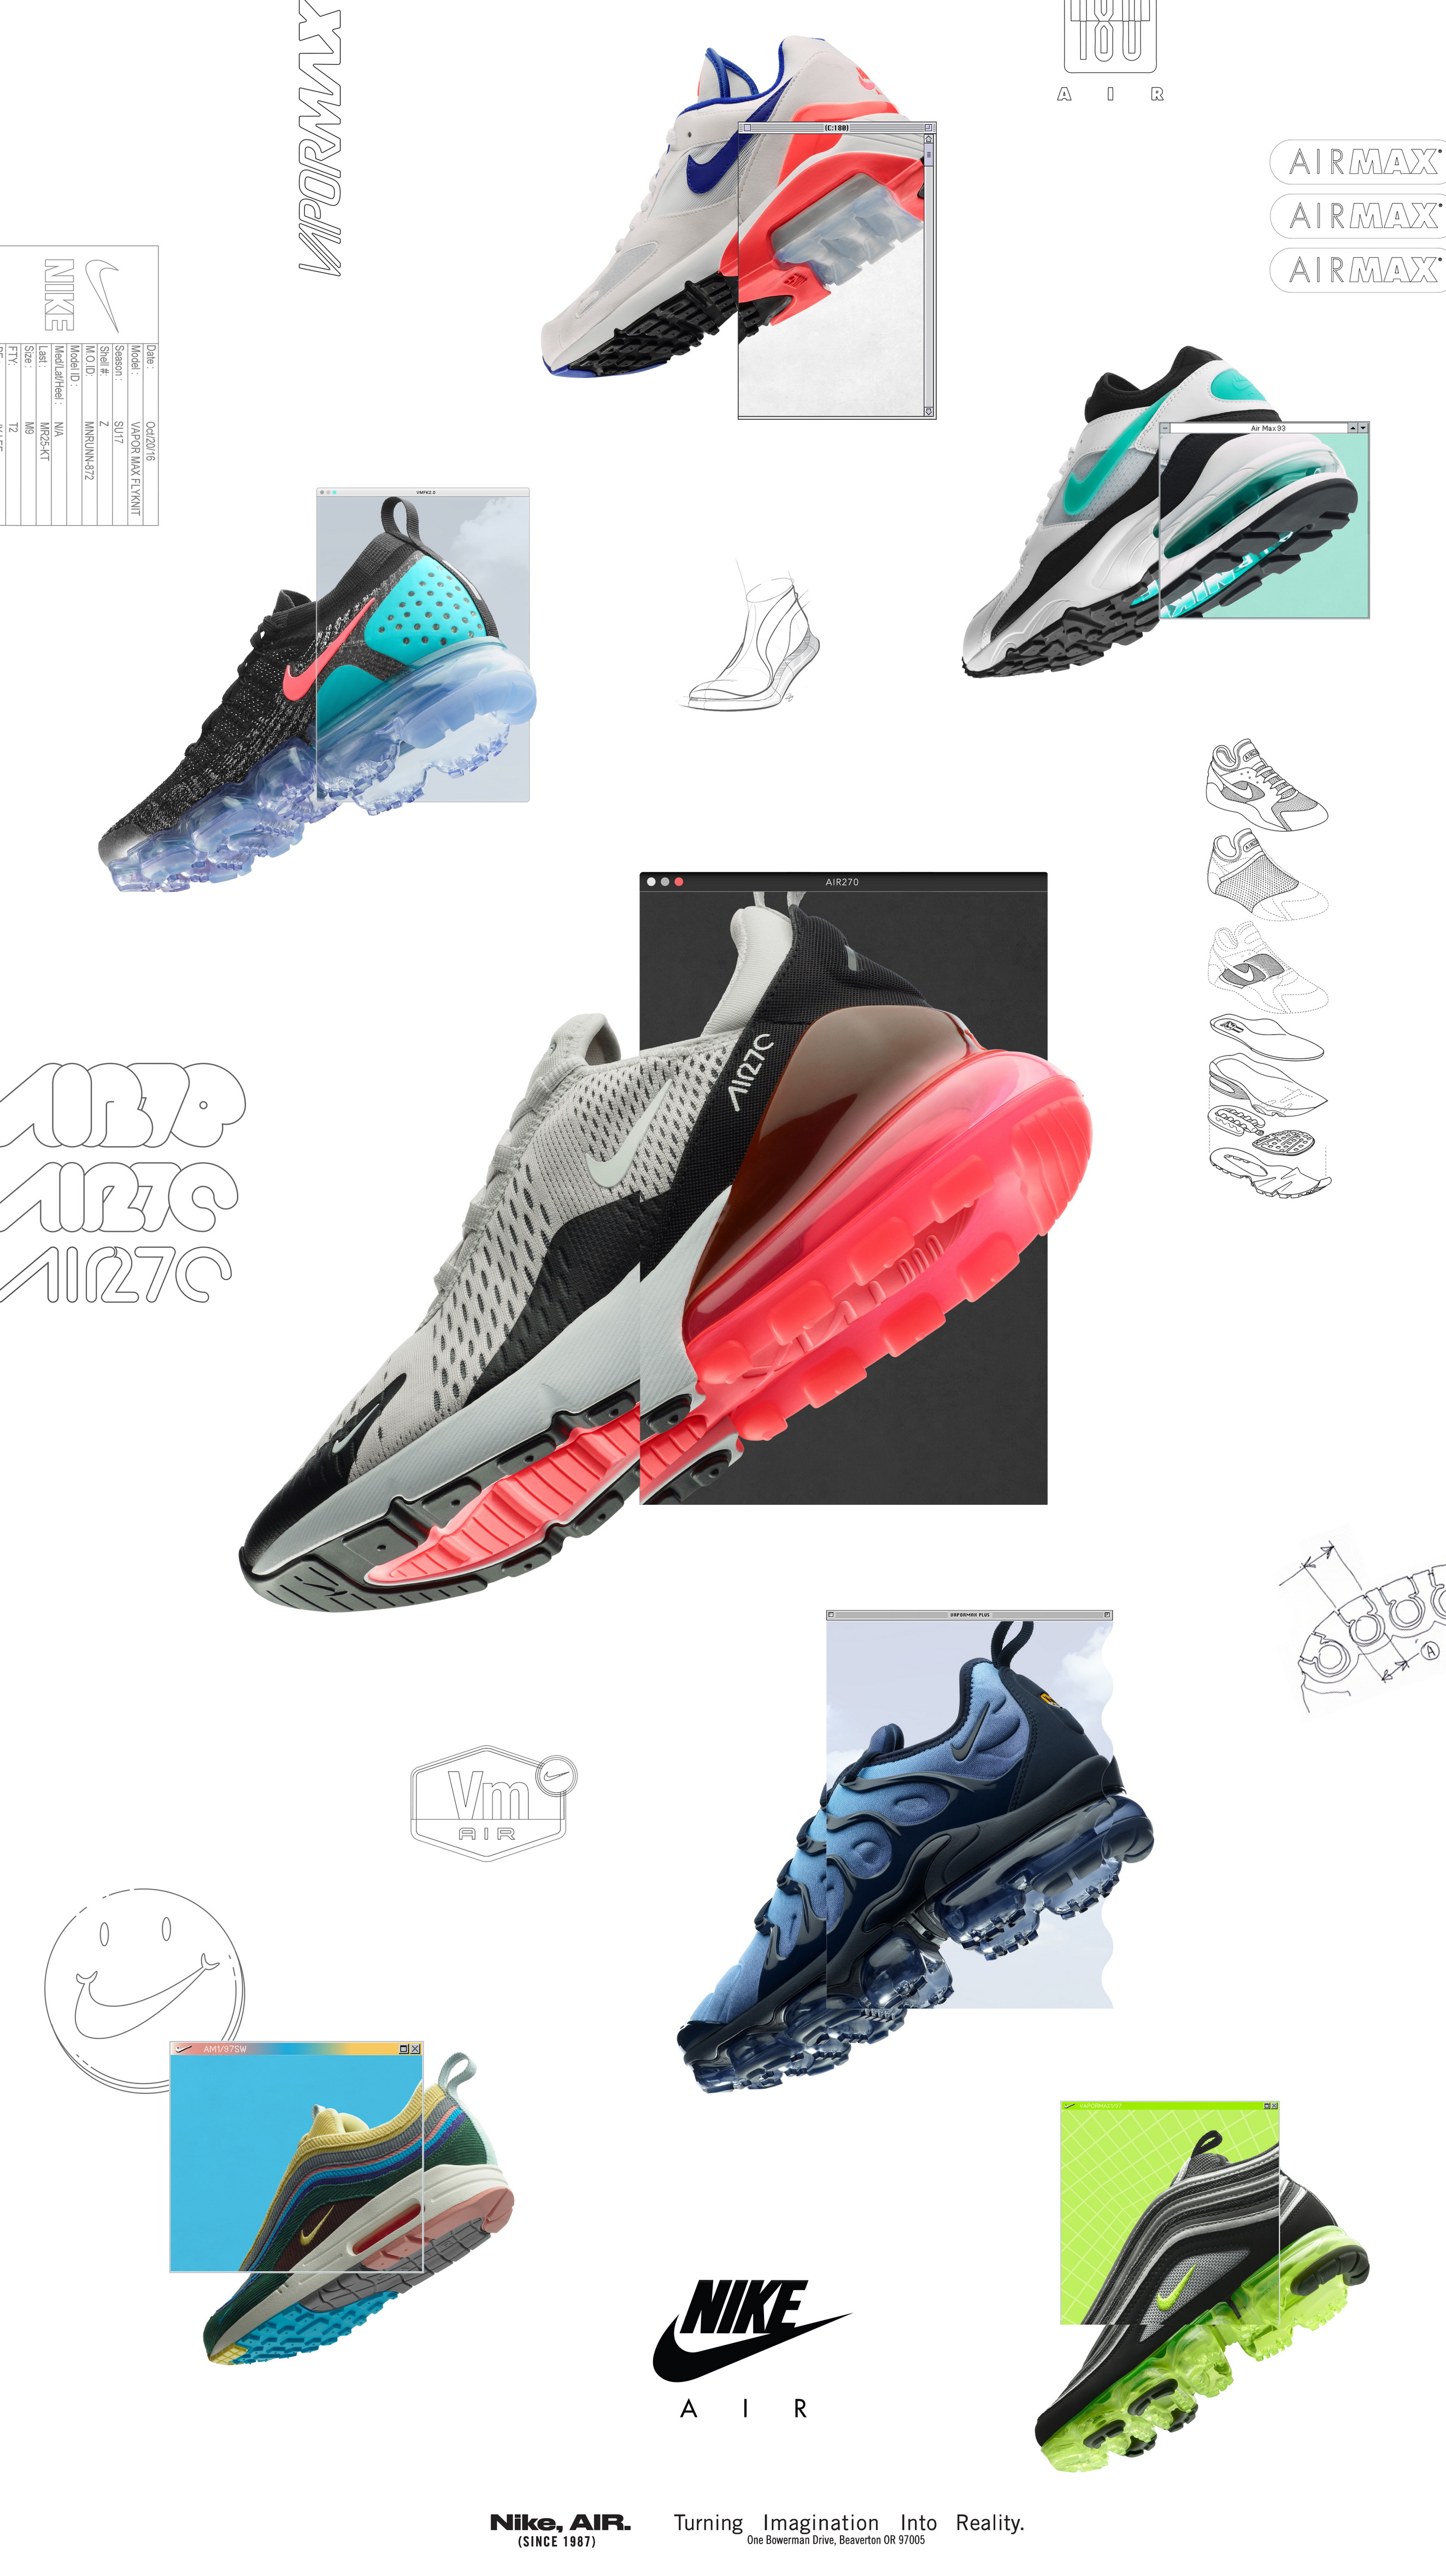 air max day 2018 date